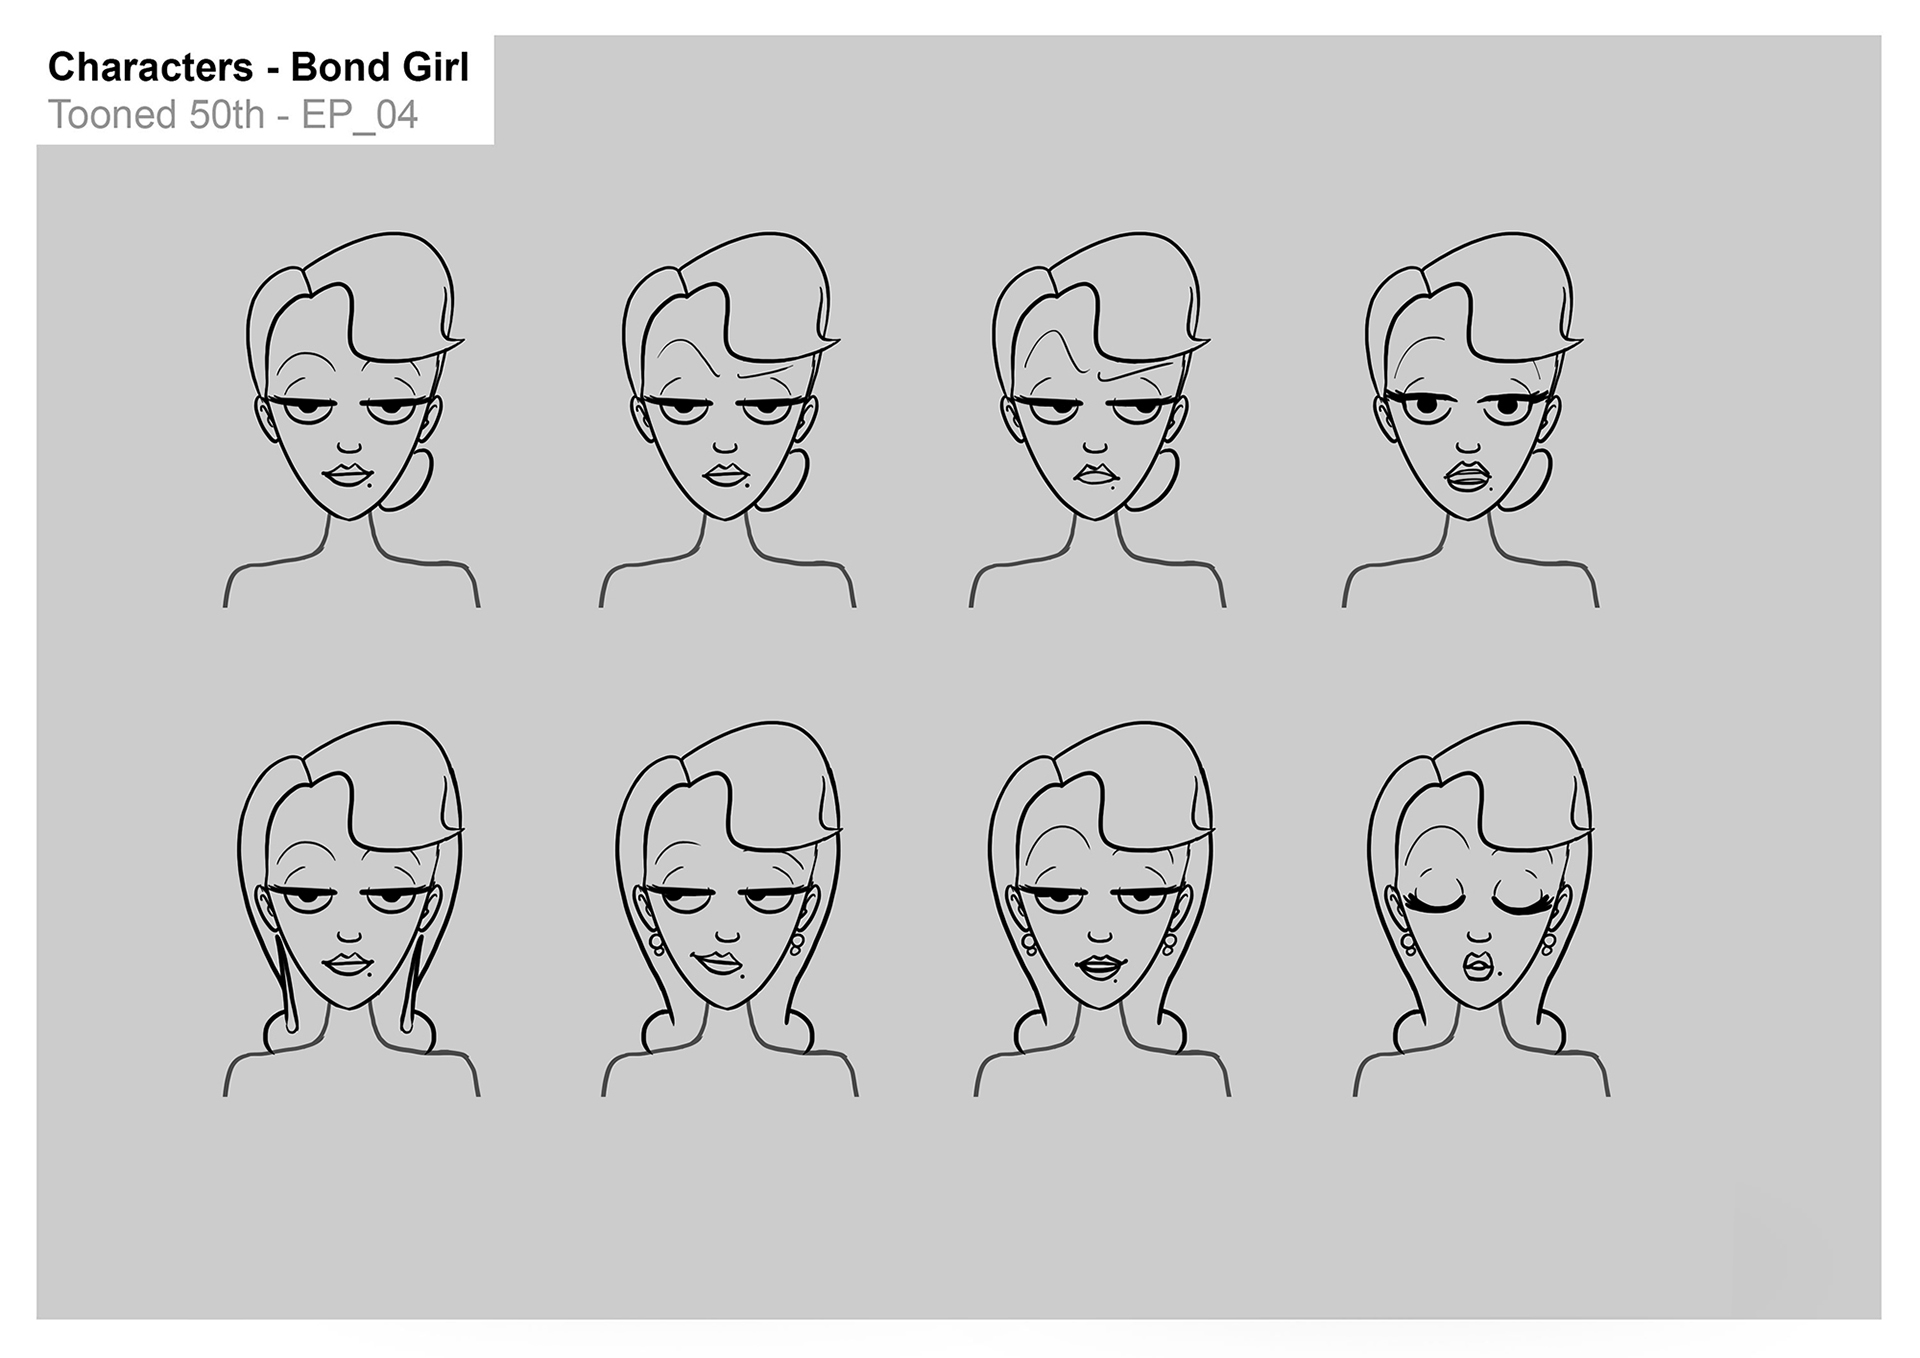 TOON50th-CONCEPT-EP4-BondGirl_Expressions1